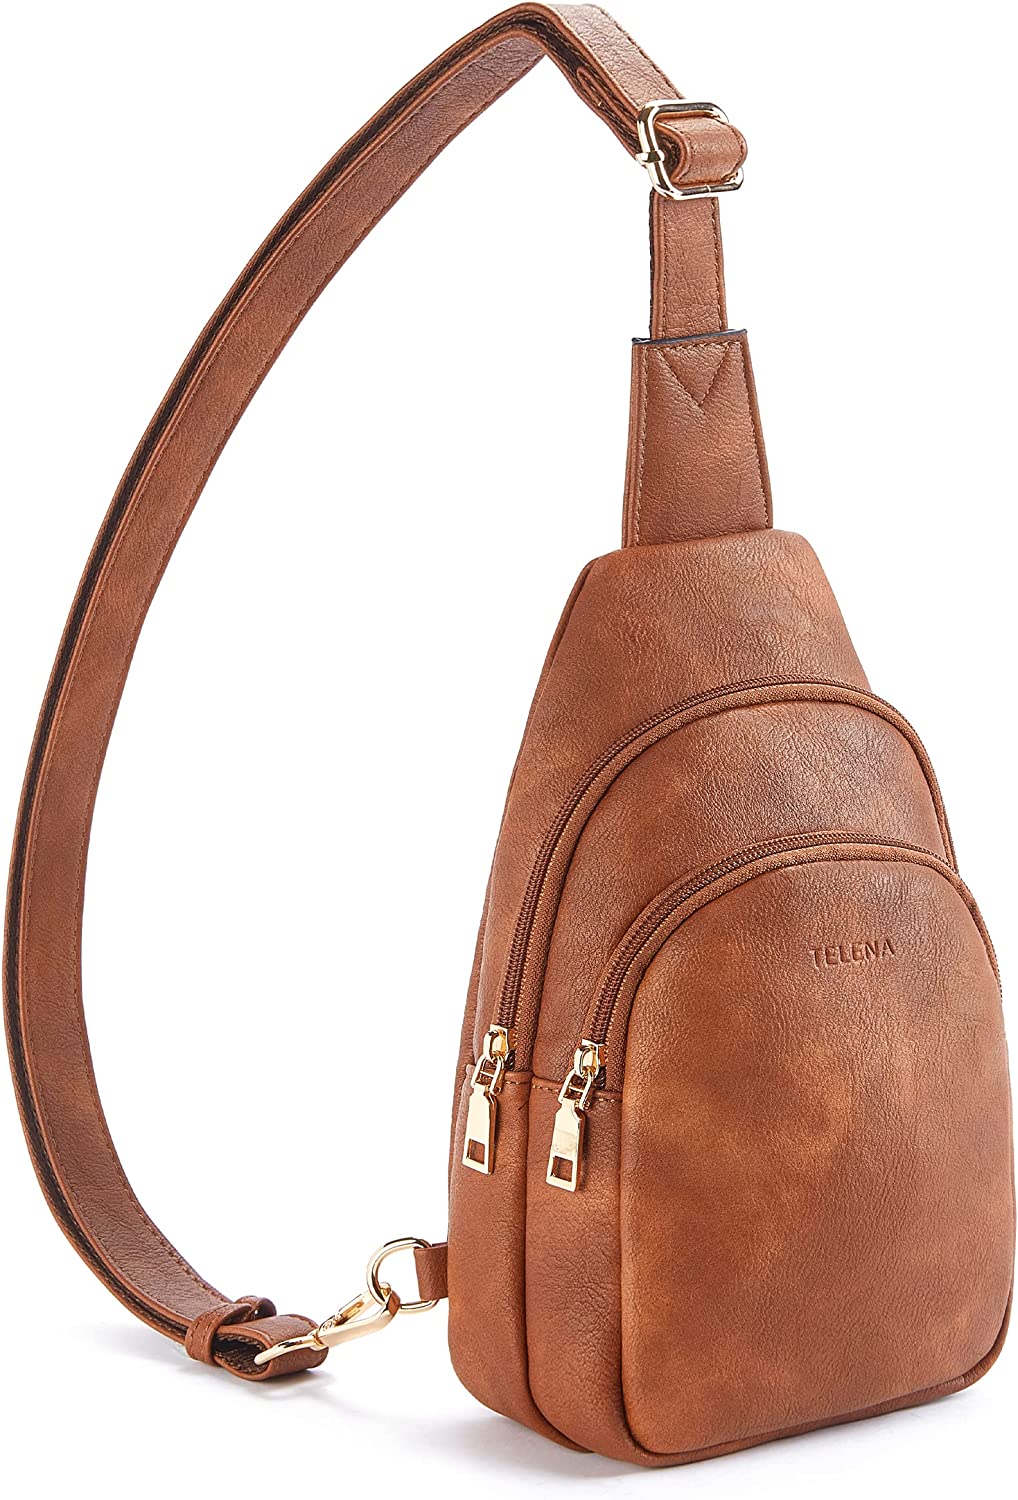 Telena Women's Small Leather Sling Bag